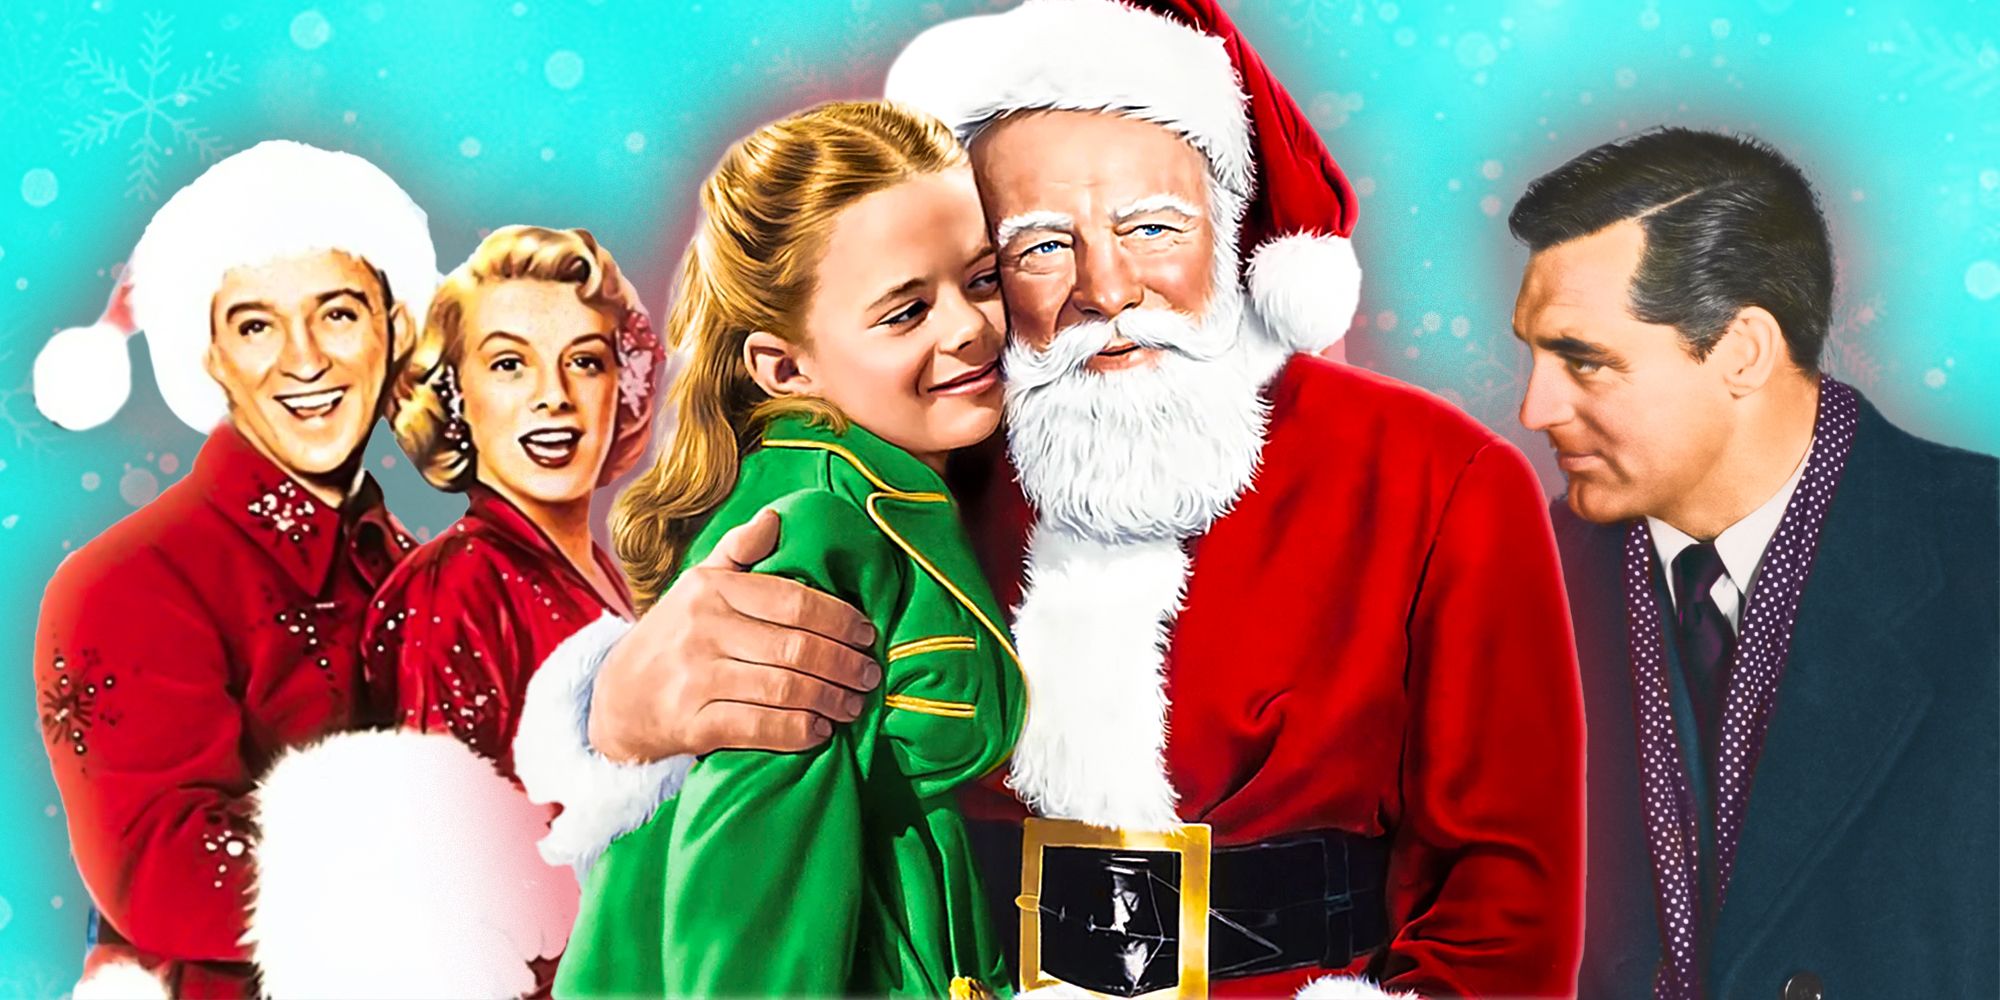 Collage of characters from White Christmas, Miracle on 34th Street, and The Bishop's Wife